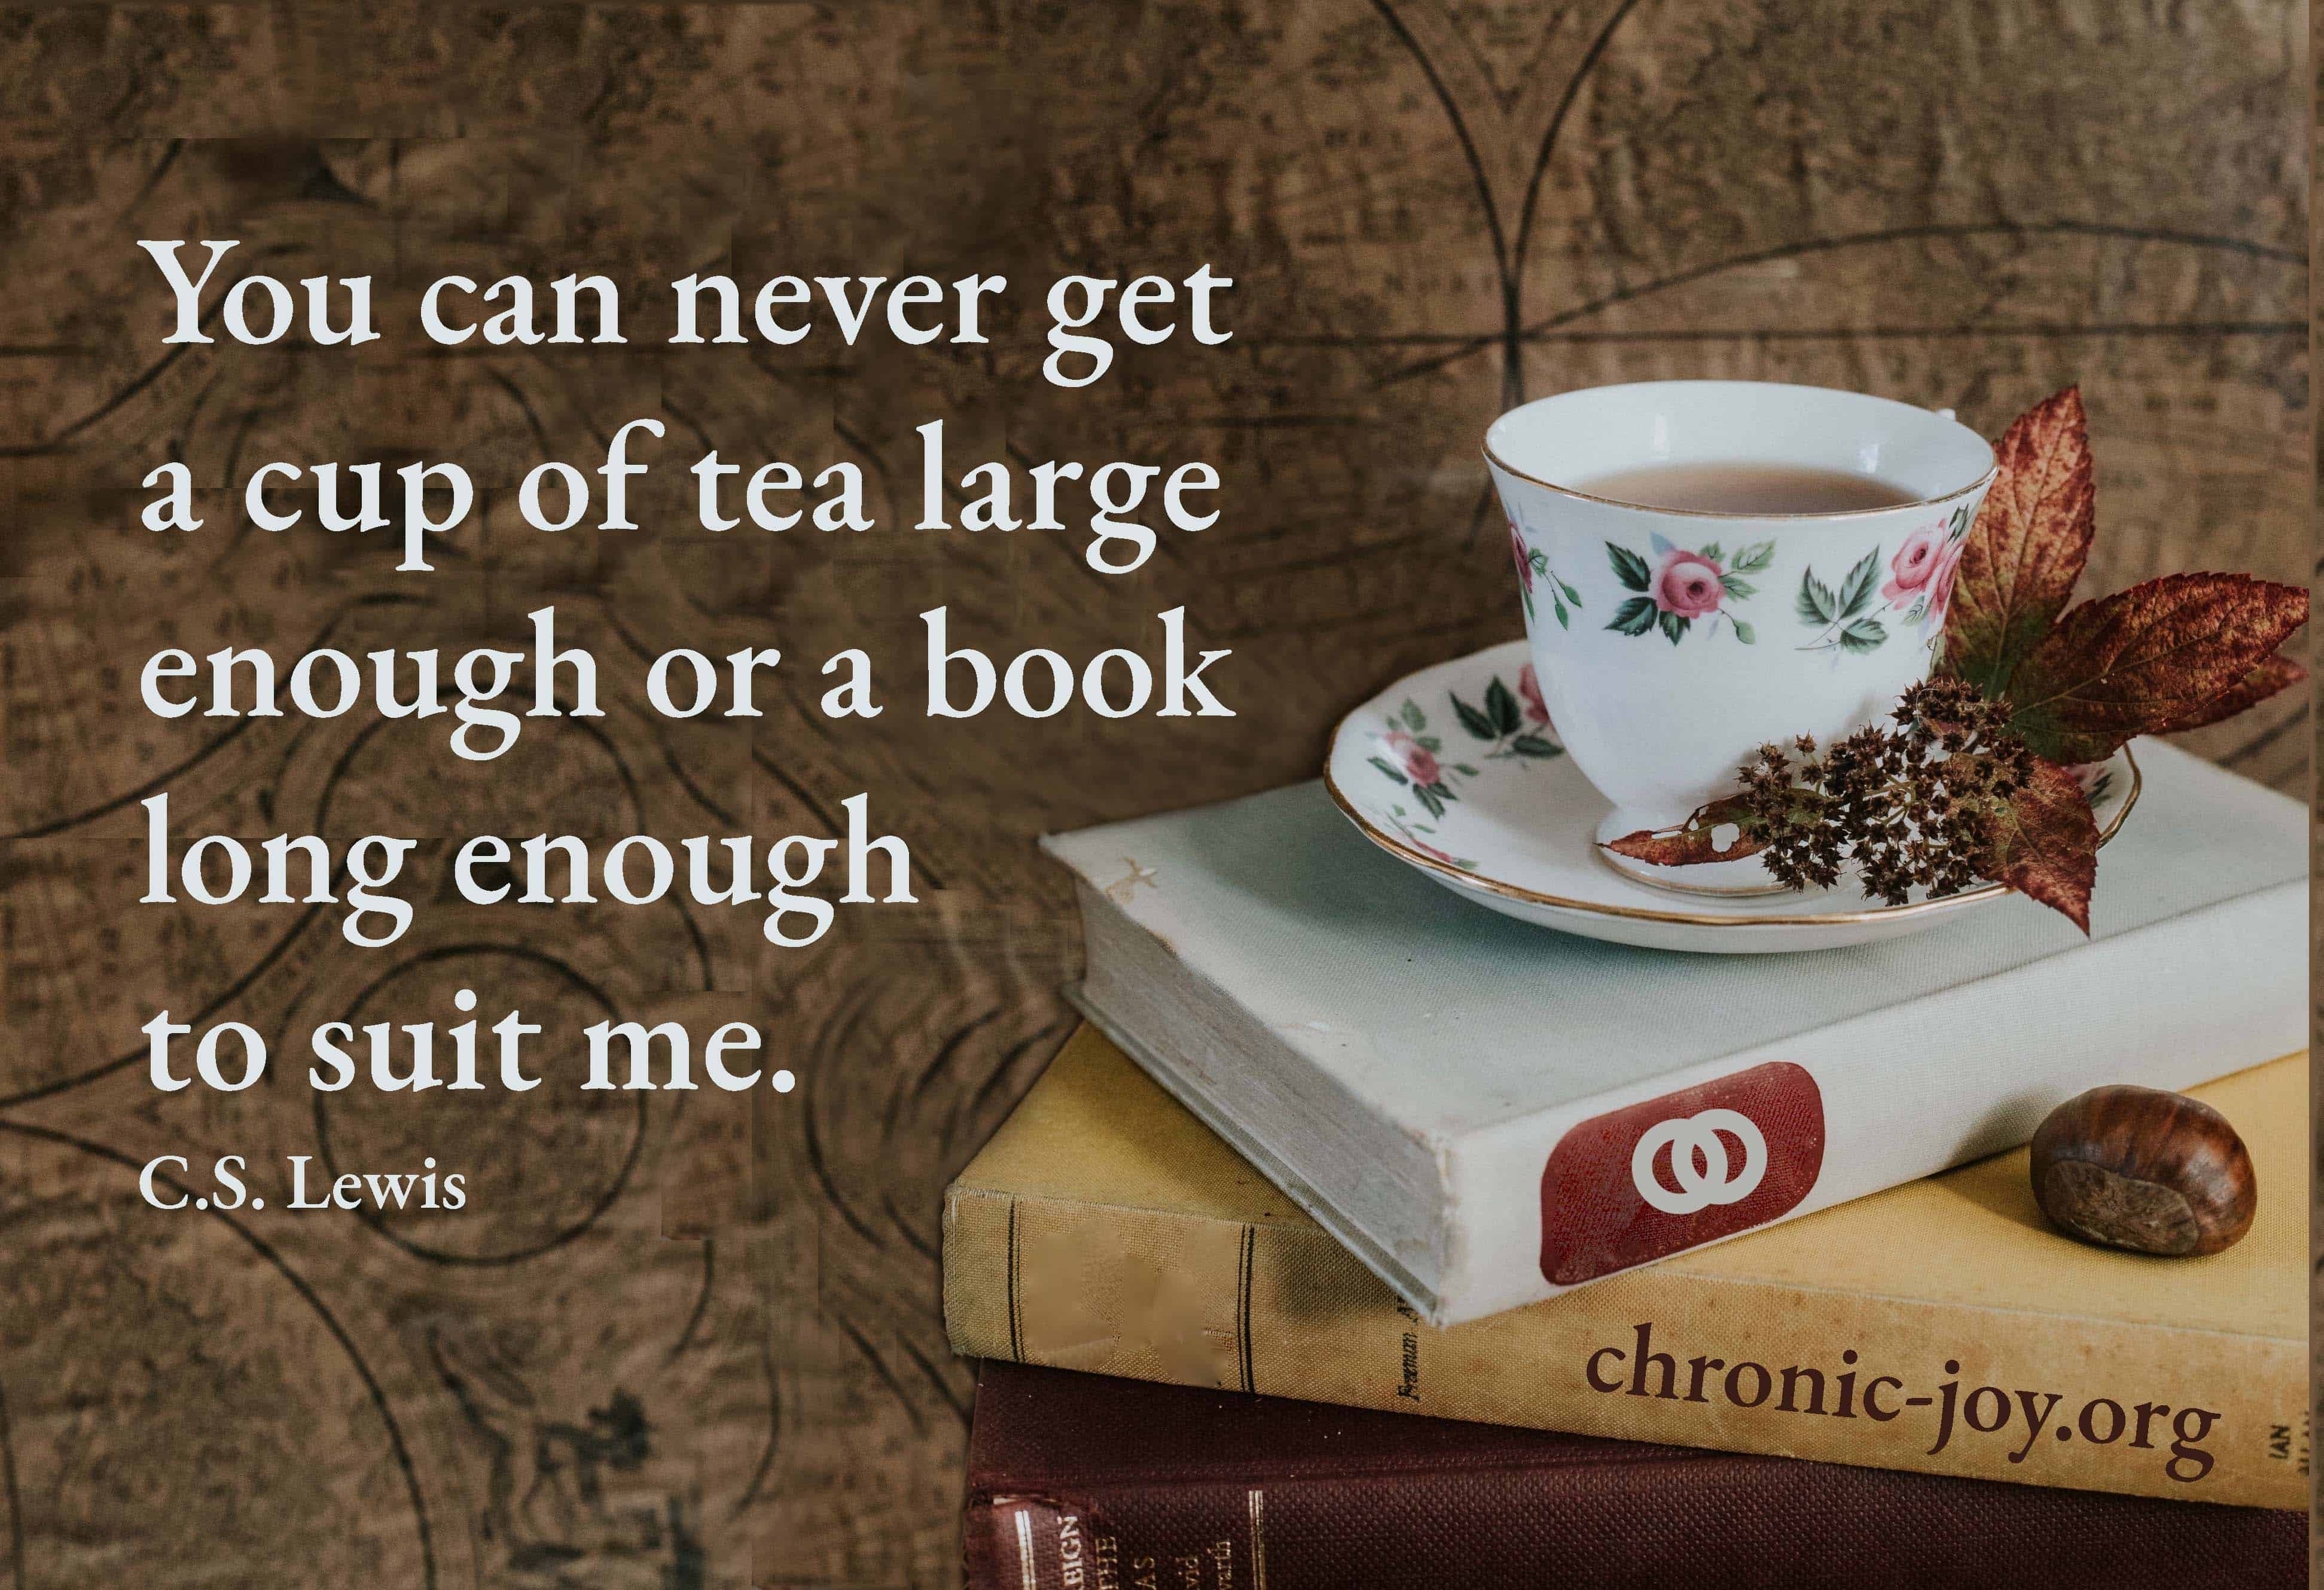 You can never get a cup of tea large enough or a book long enough to suit me. -C.S. Lewis